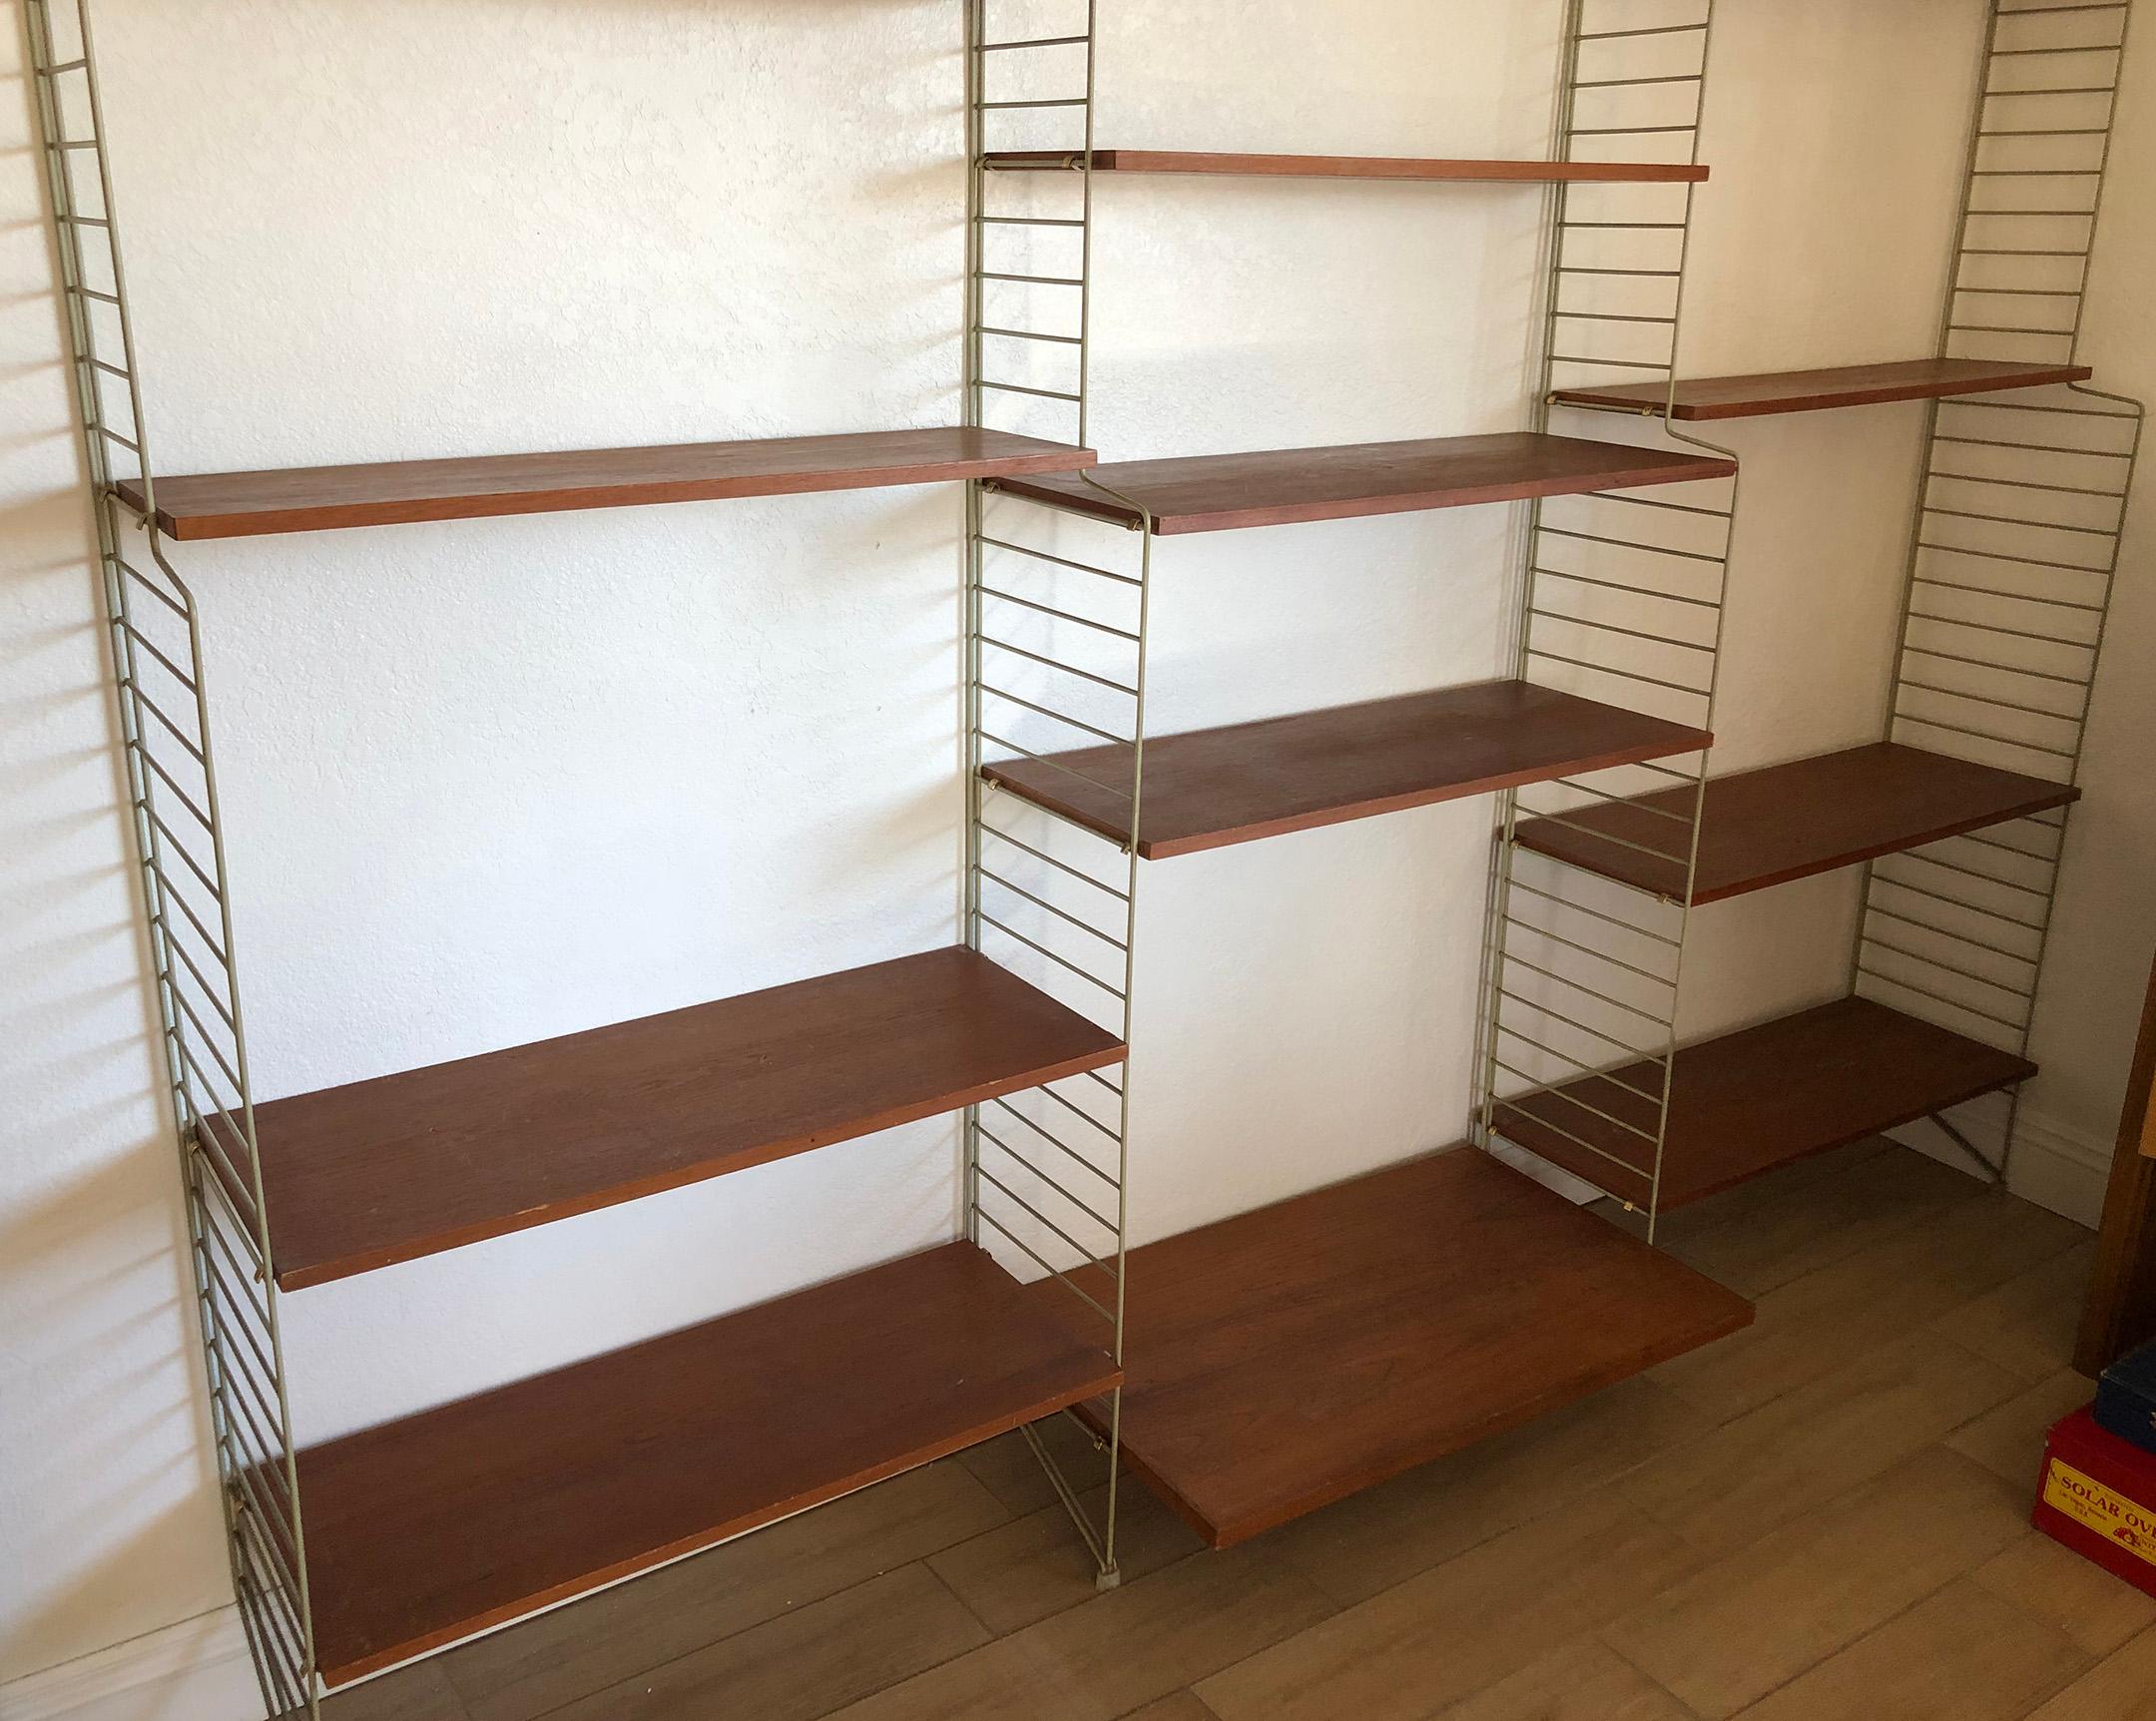 An absolutely gorgeous wall unit by Nils (Nisse) Strinning for String Design. This wall unit stands free against any wall and does not require any mounting hardware or screws. A great modern piece!

Metal brackets are off-white with hardwood teak